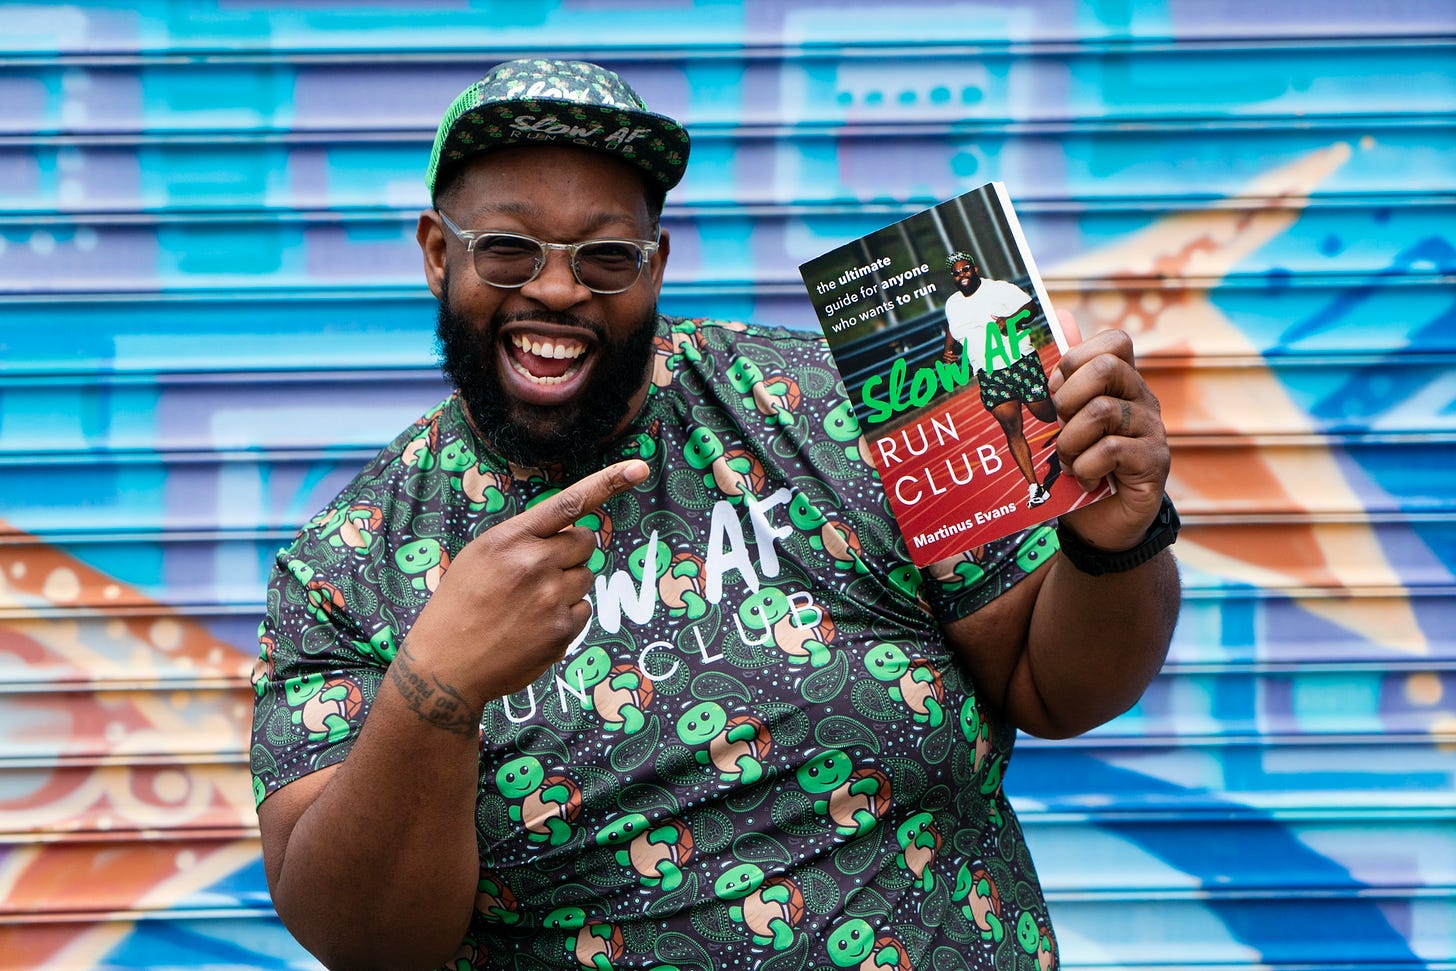 Martinus Evans with his book, Slow AF Run Club